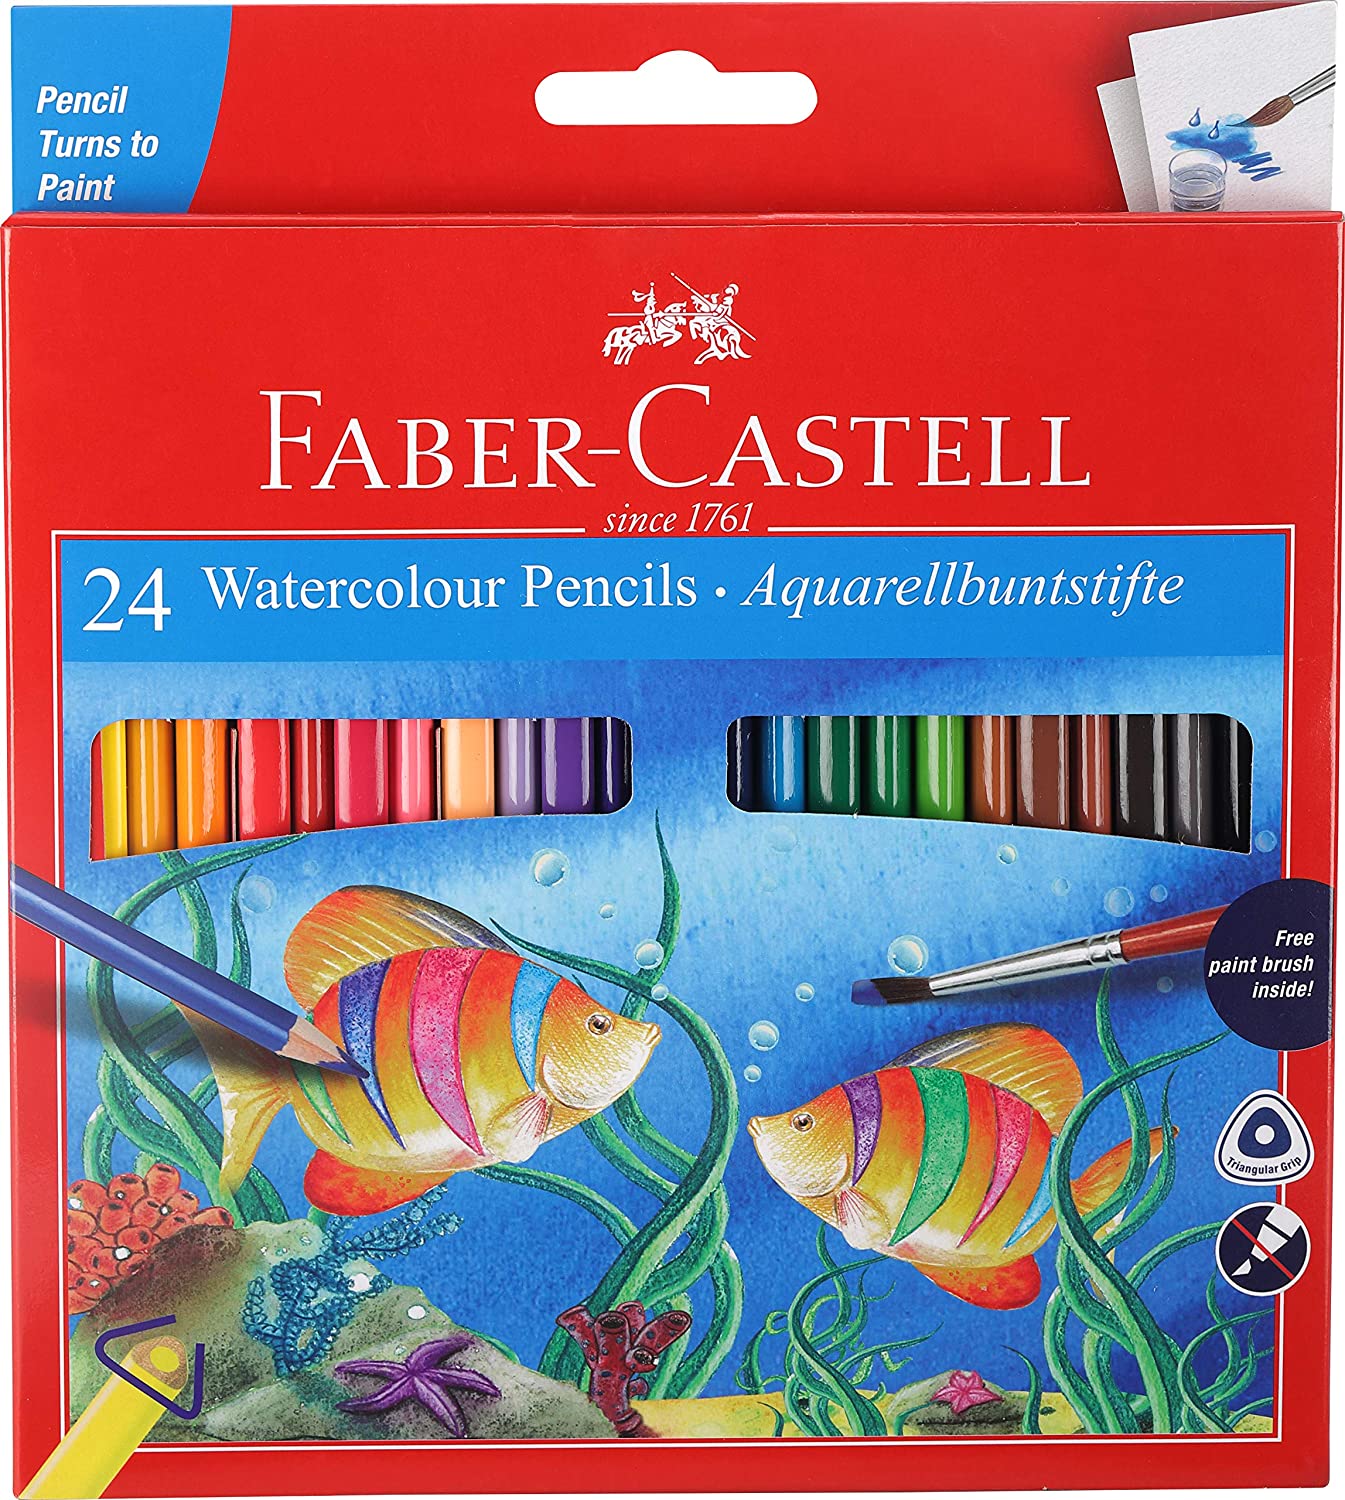 Faber Castell Pencil Shades